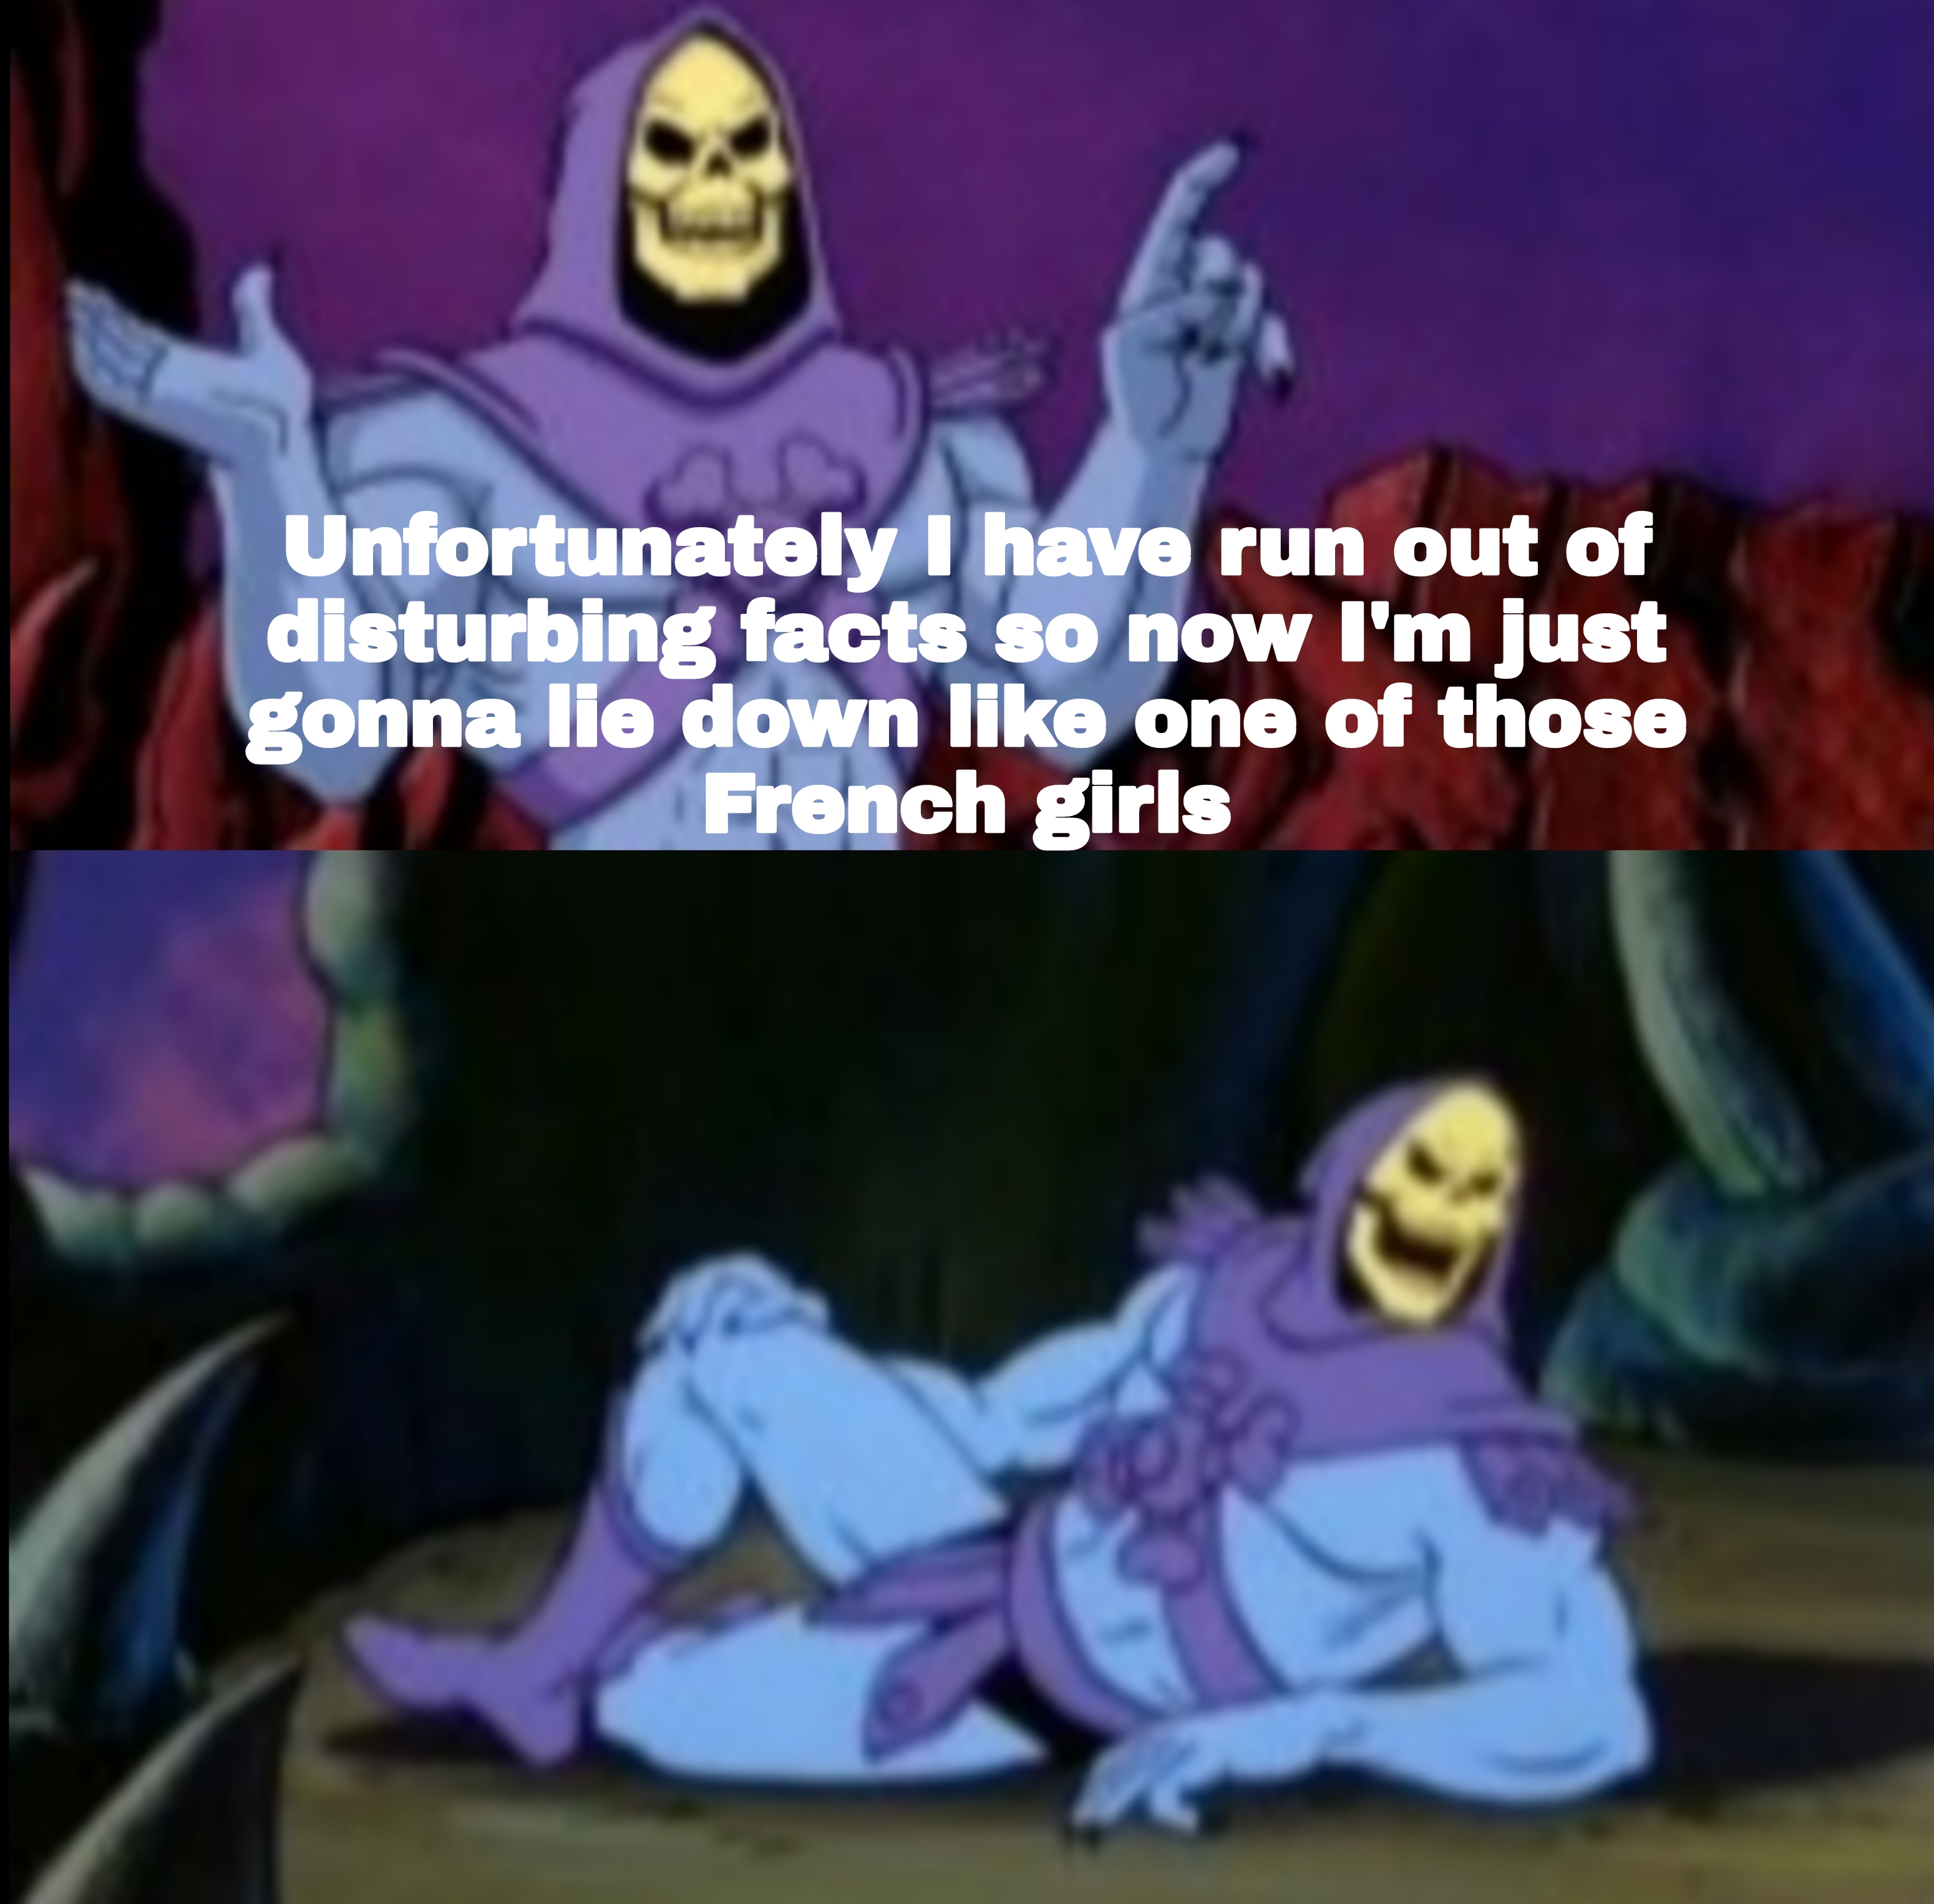 skeletor meme template - Unfortunately I have run out of disturbing facts so now I'm just gonna lie down one of those French girls